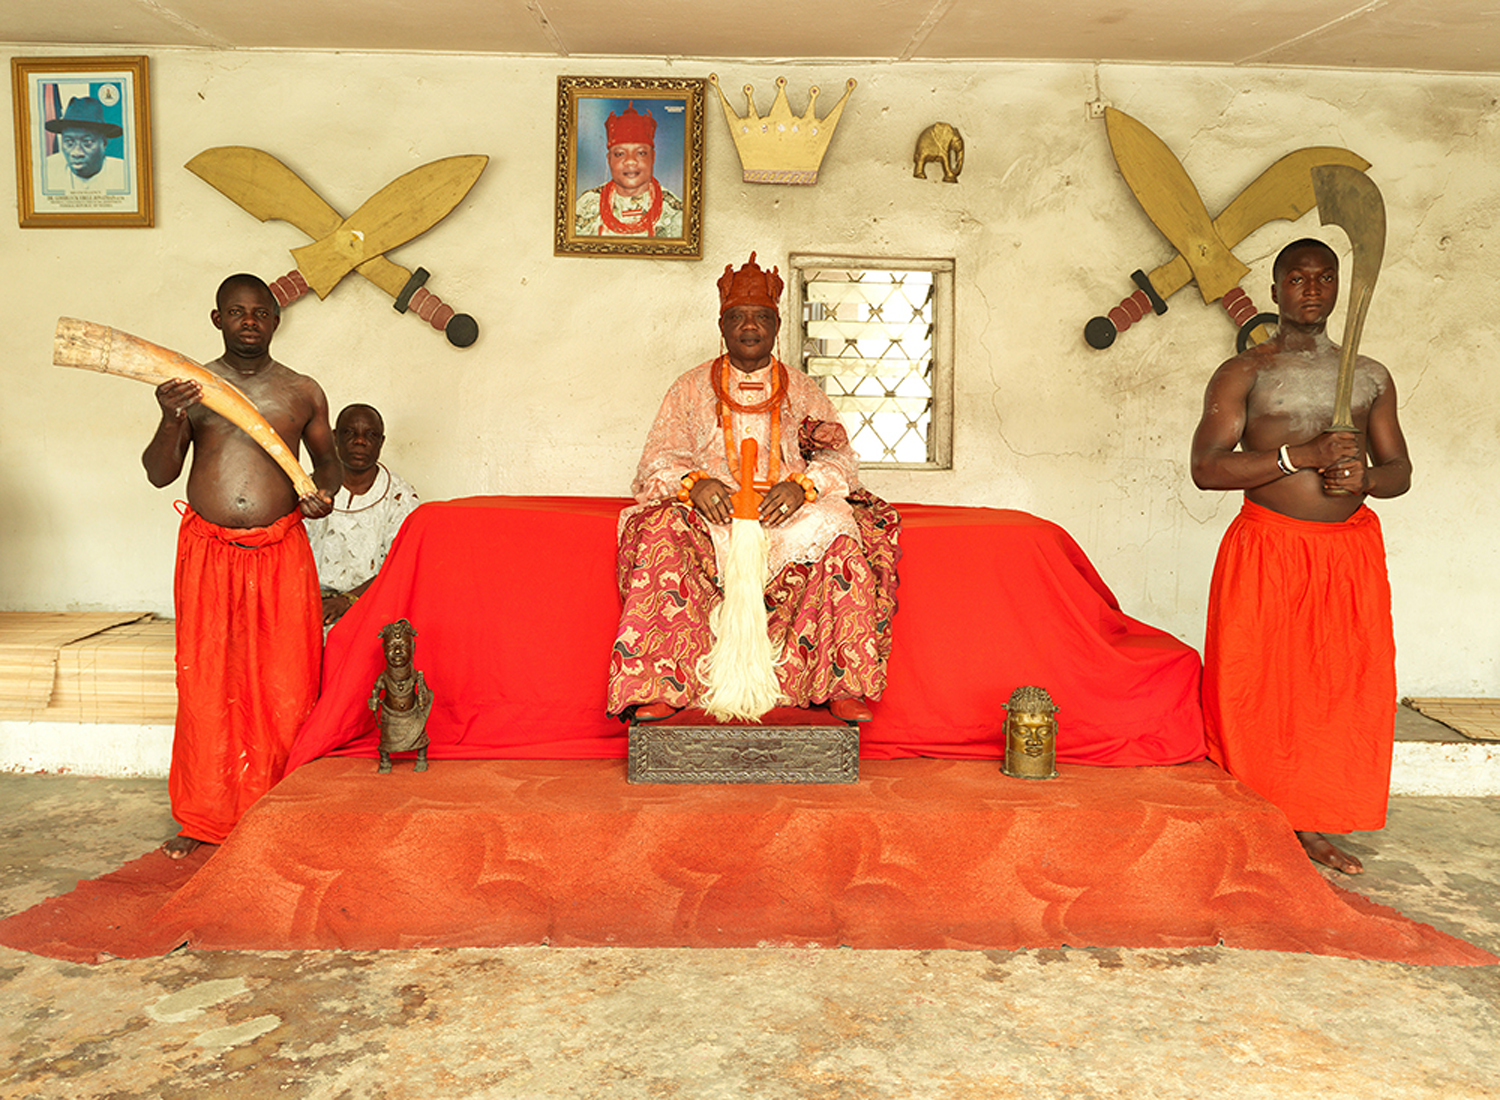 His Majesty, Wilson Ojakovo Oghoghovwe Oharisi 111 (jp) The ovie of Ughelli enthroned 26/4/80 is the current paramount traditional ruler of the great kingdom of Ughelli an Urhoboland.